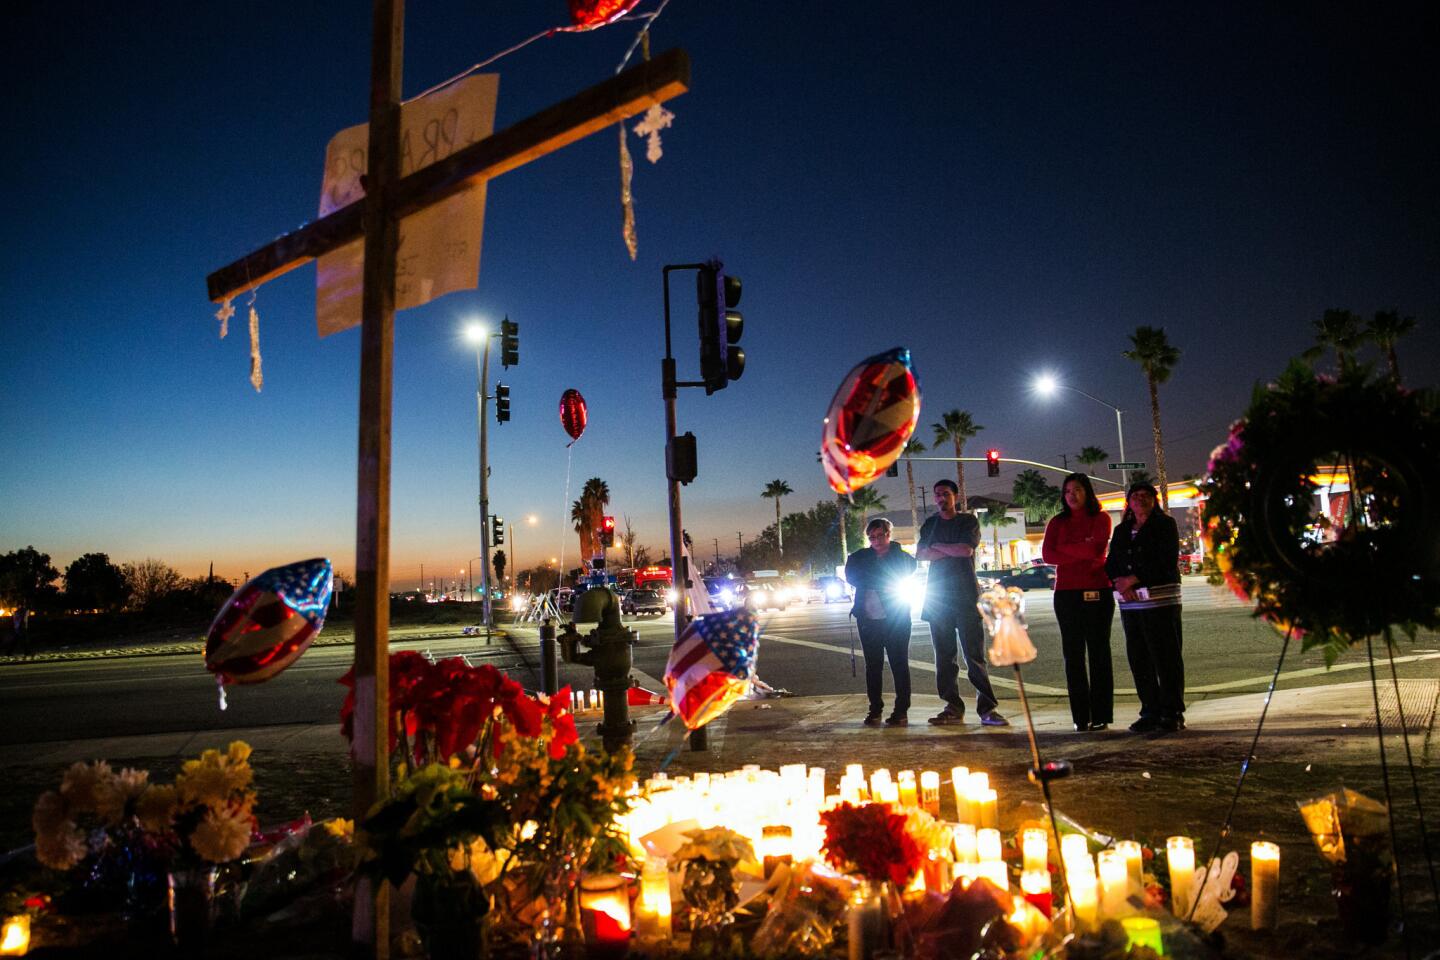 A memorial site for the victims of the mass shooting in San Bernardino, Calif., on Dec. 4, 2015.